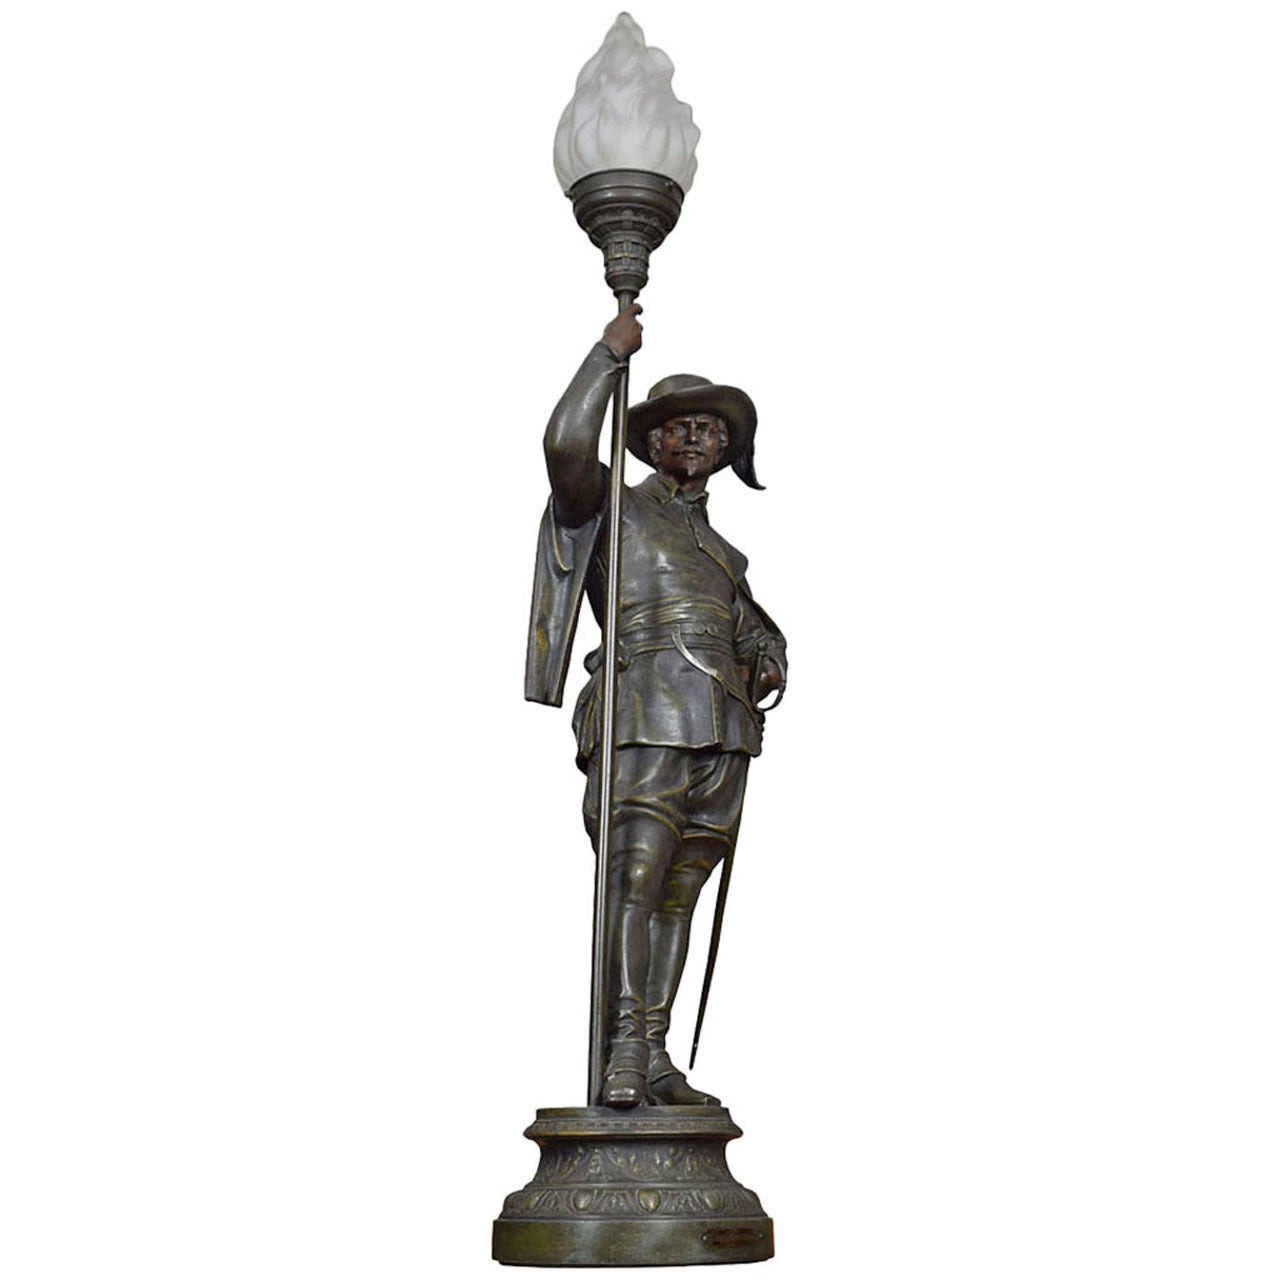 Late 19th Century French Renaissance Soldier Holding a Lamp